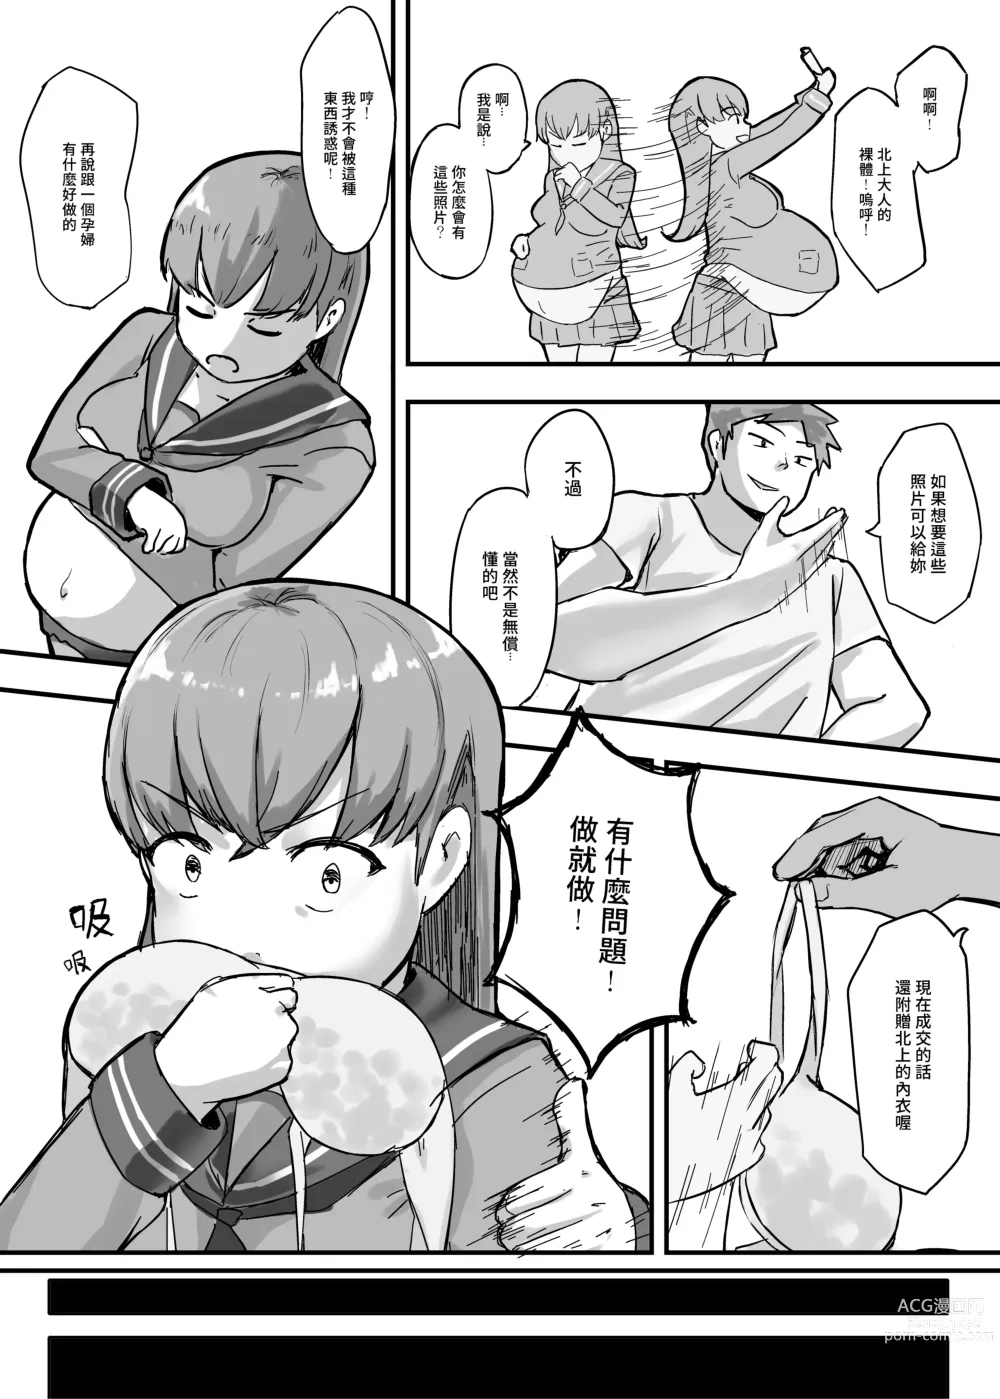 Page 6 of doujinshi Oi who was tempted